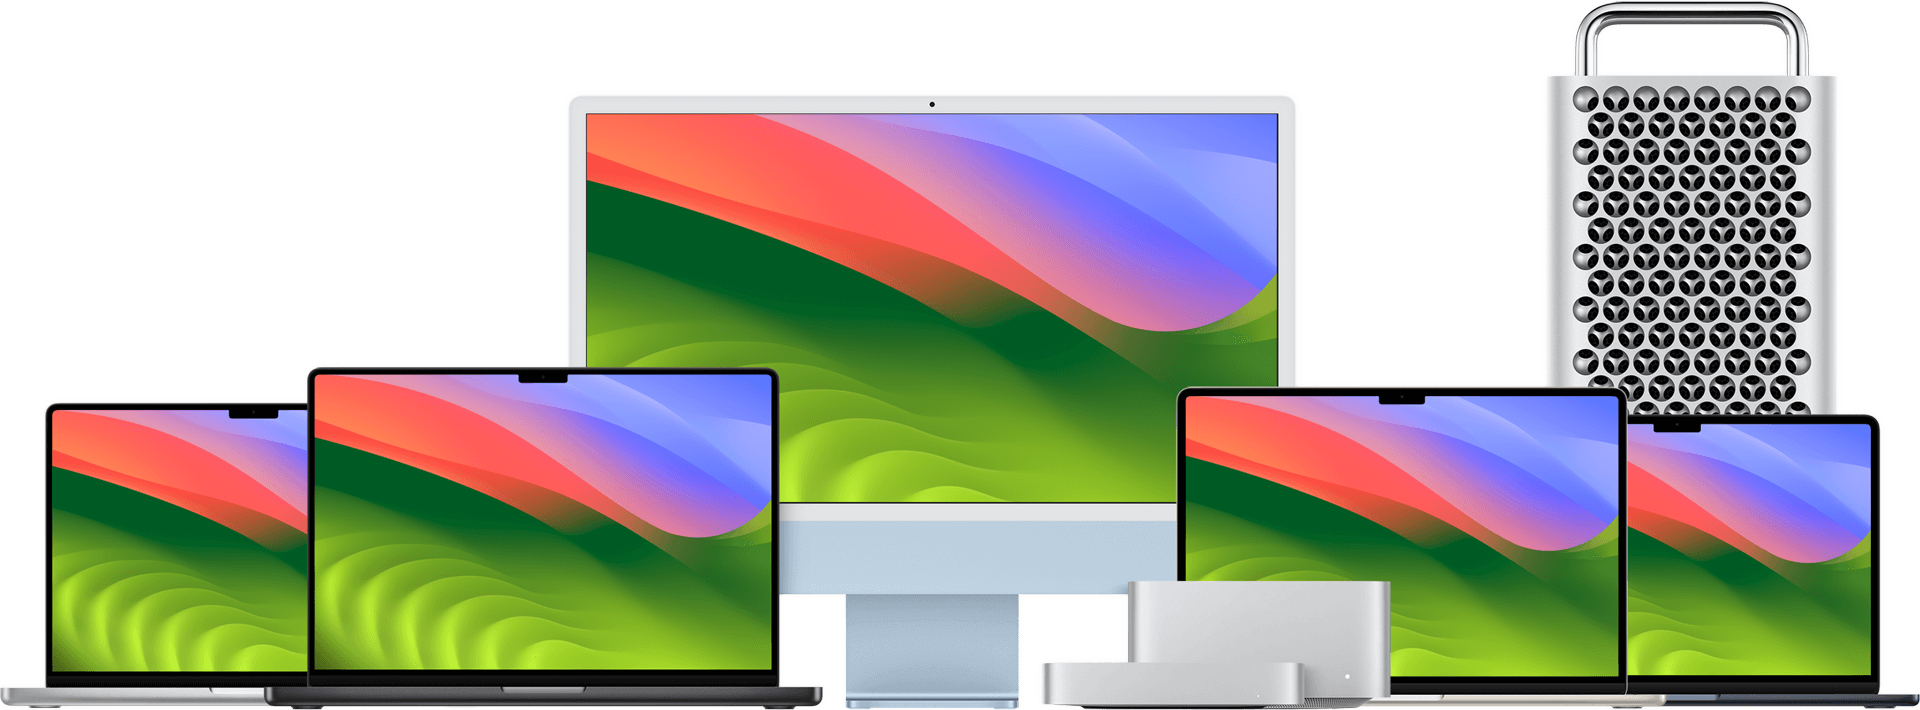 Apple announces new M3 Chips and MacBook Pro laptops